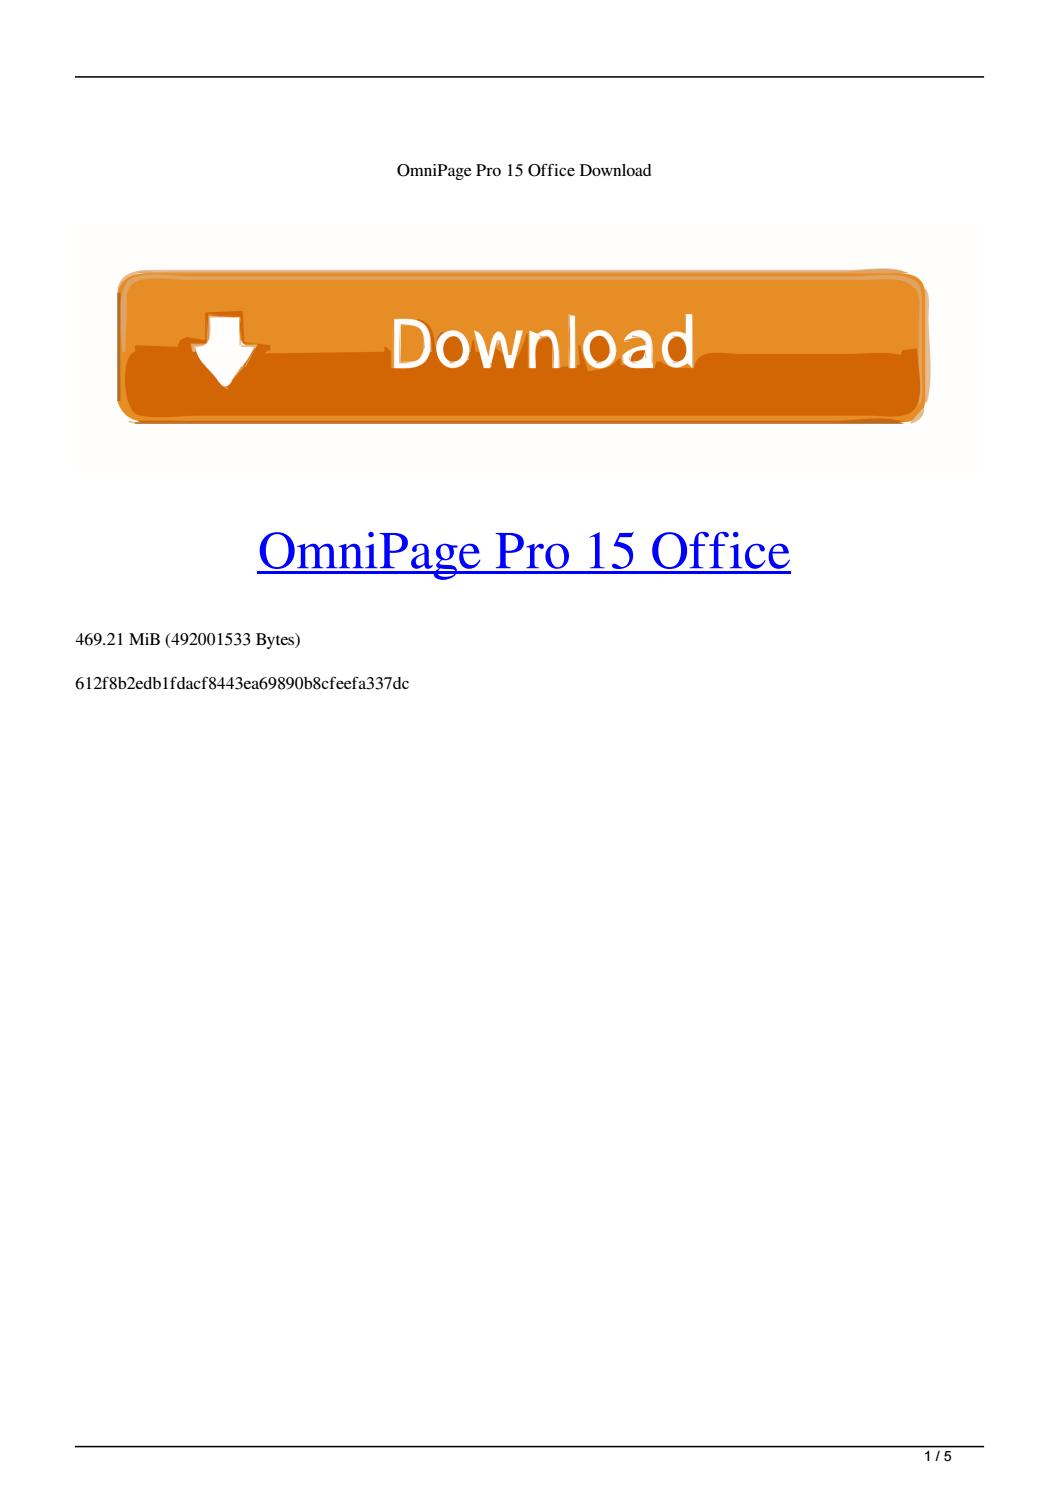 omnipage ultimate free download full version